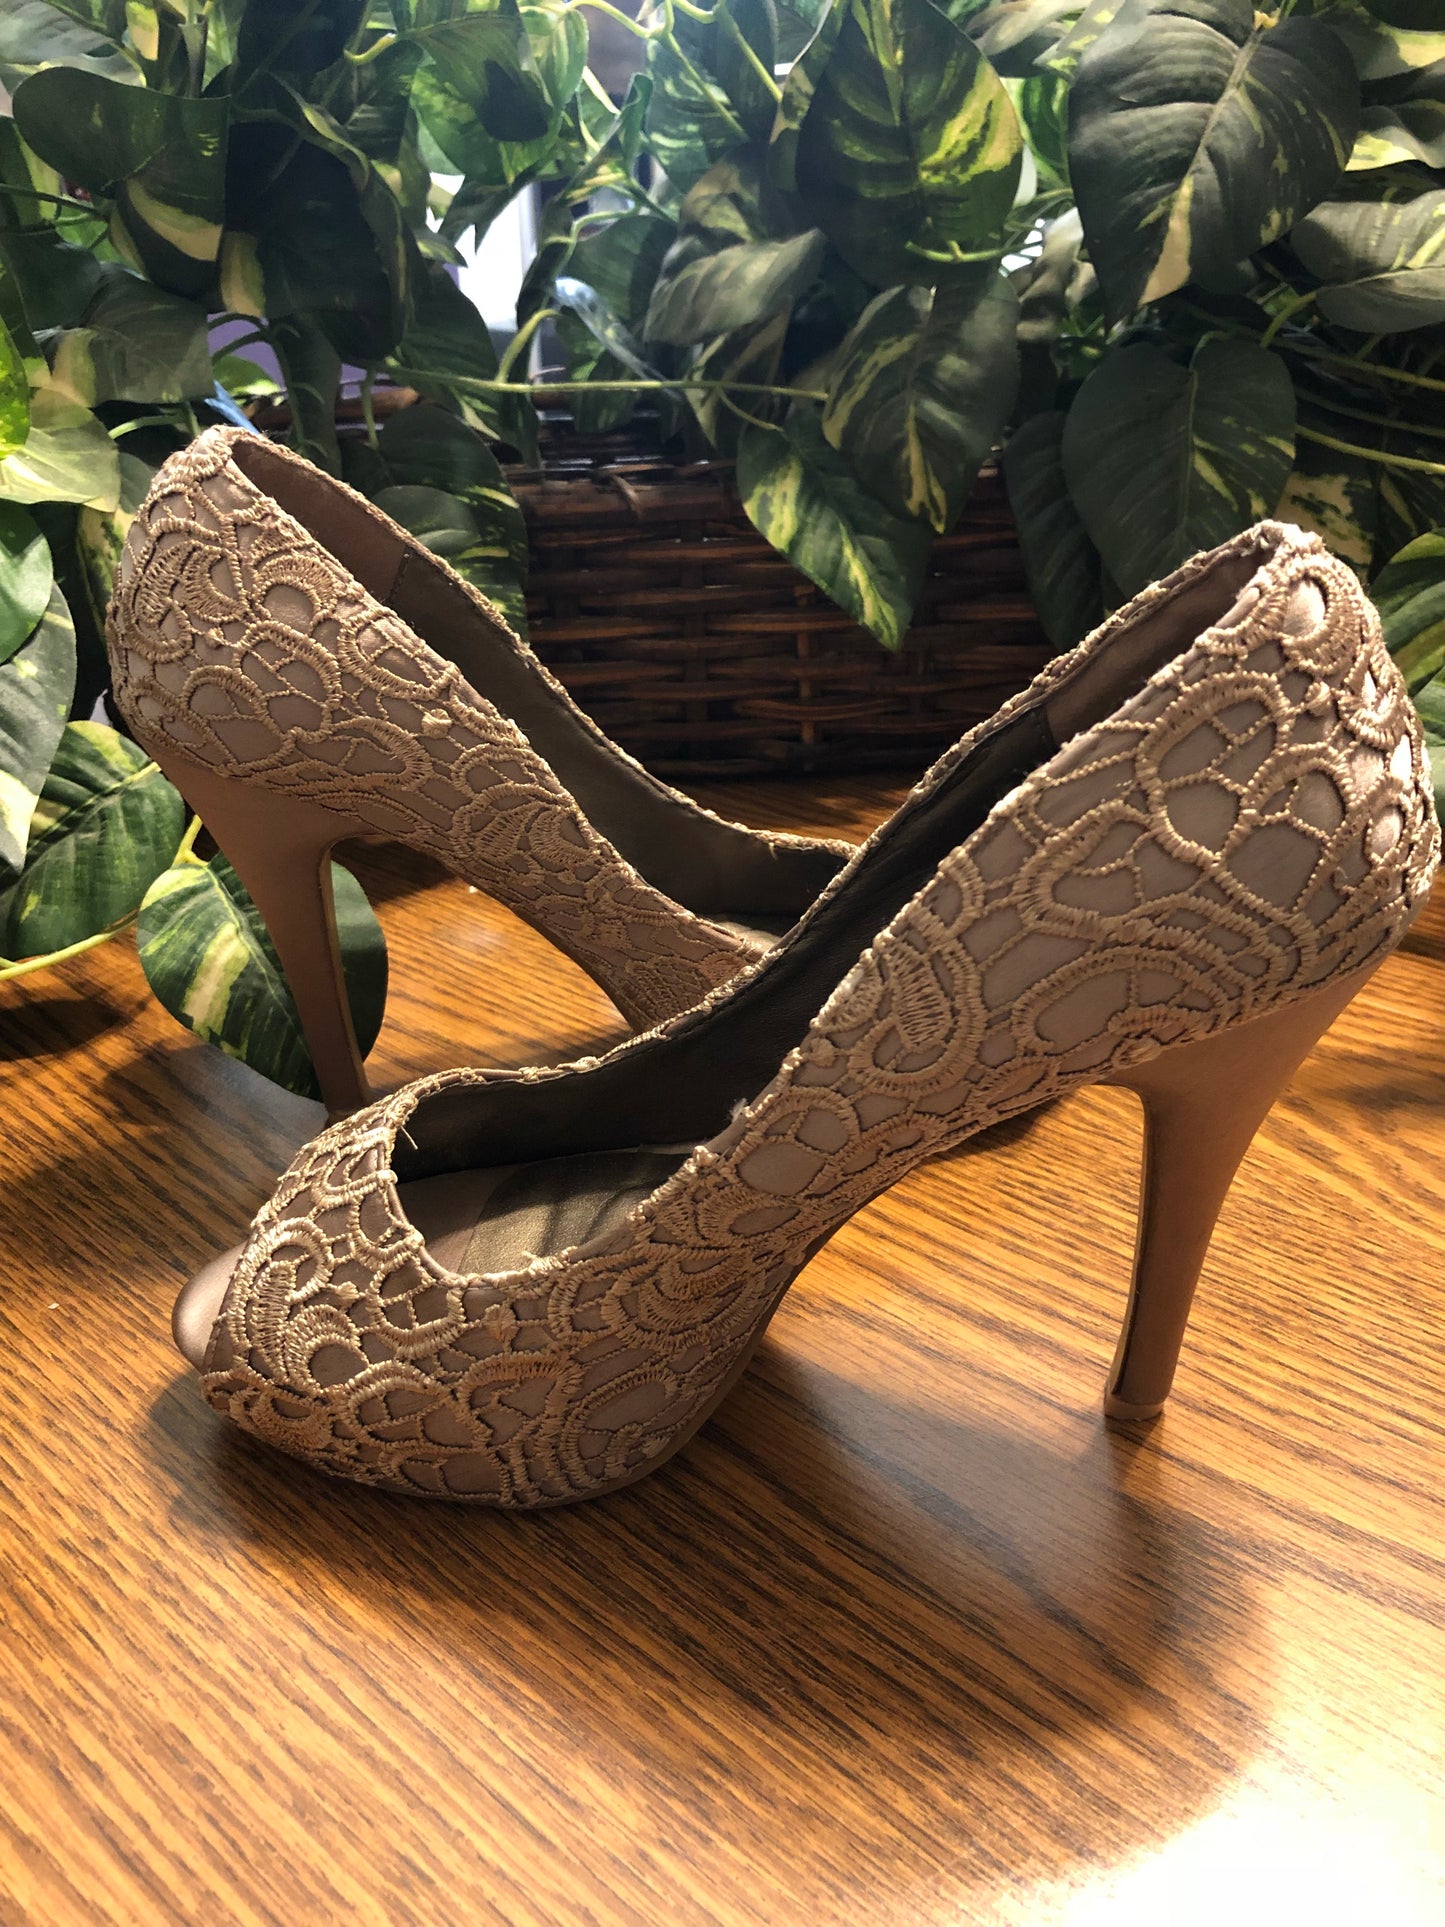 Gold Embroidered Heels from Paris, US Size 8